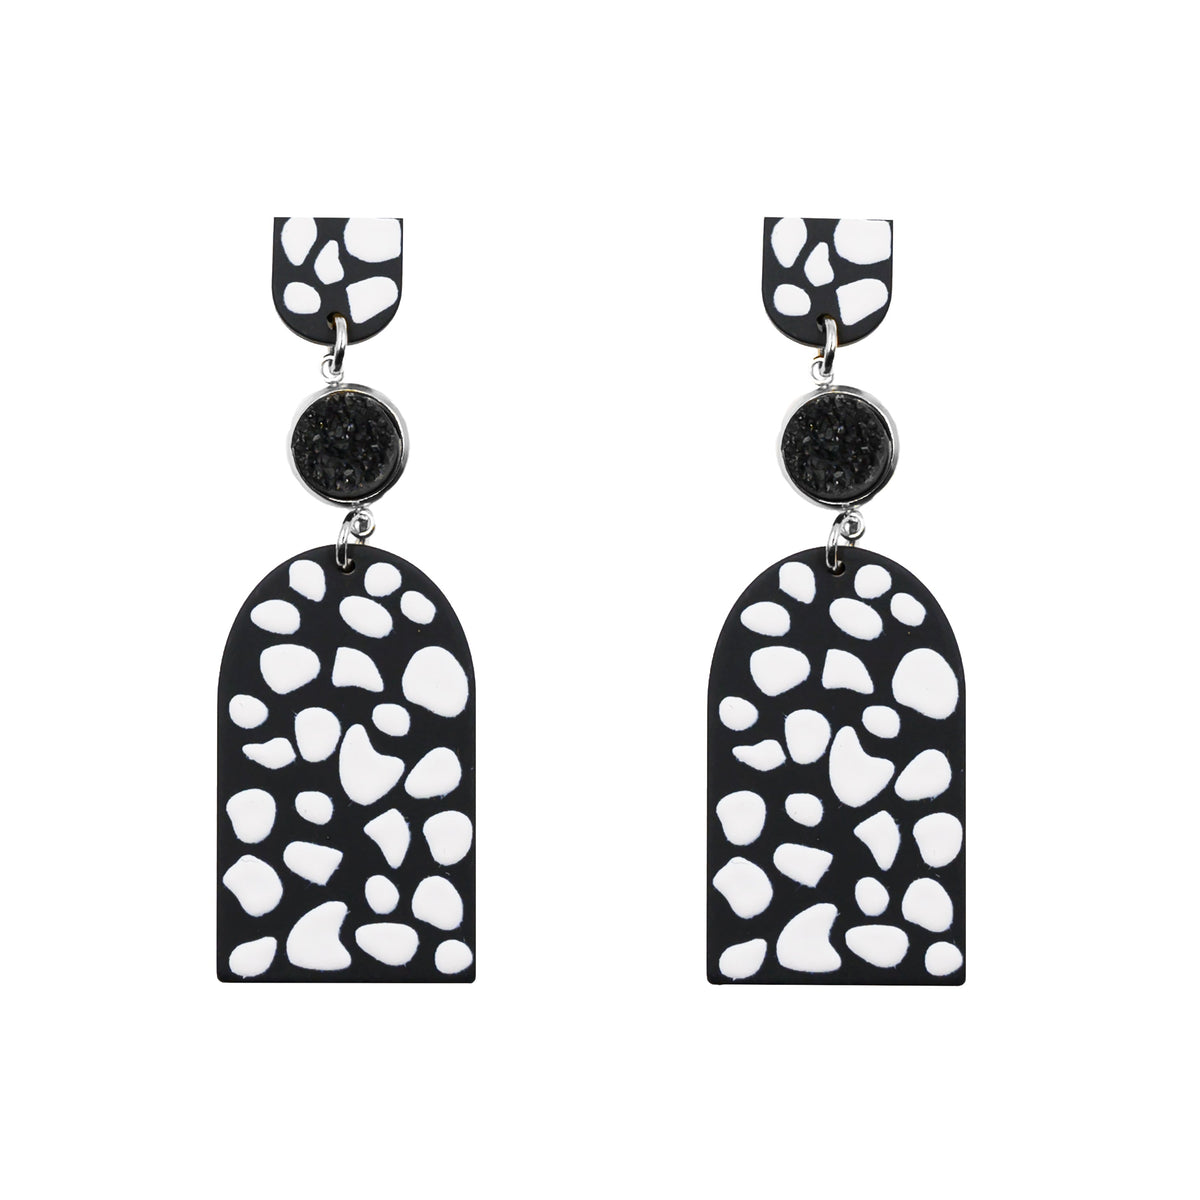 Craze Collection - Silver Jane Earrings fine designer jewelry for men and women